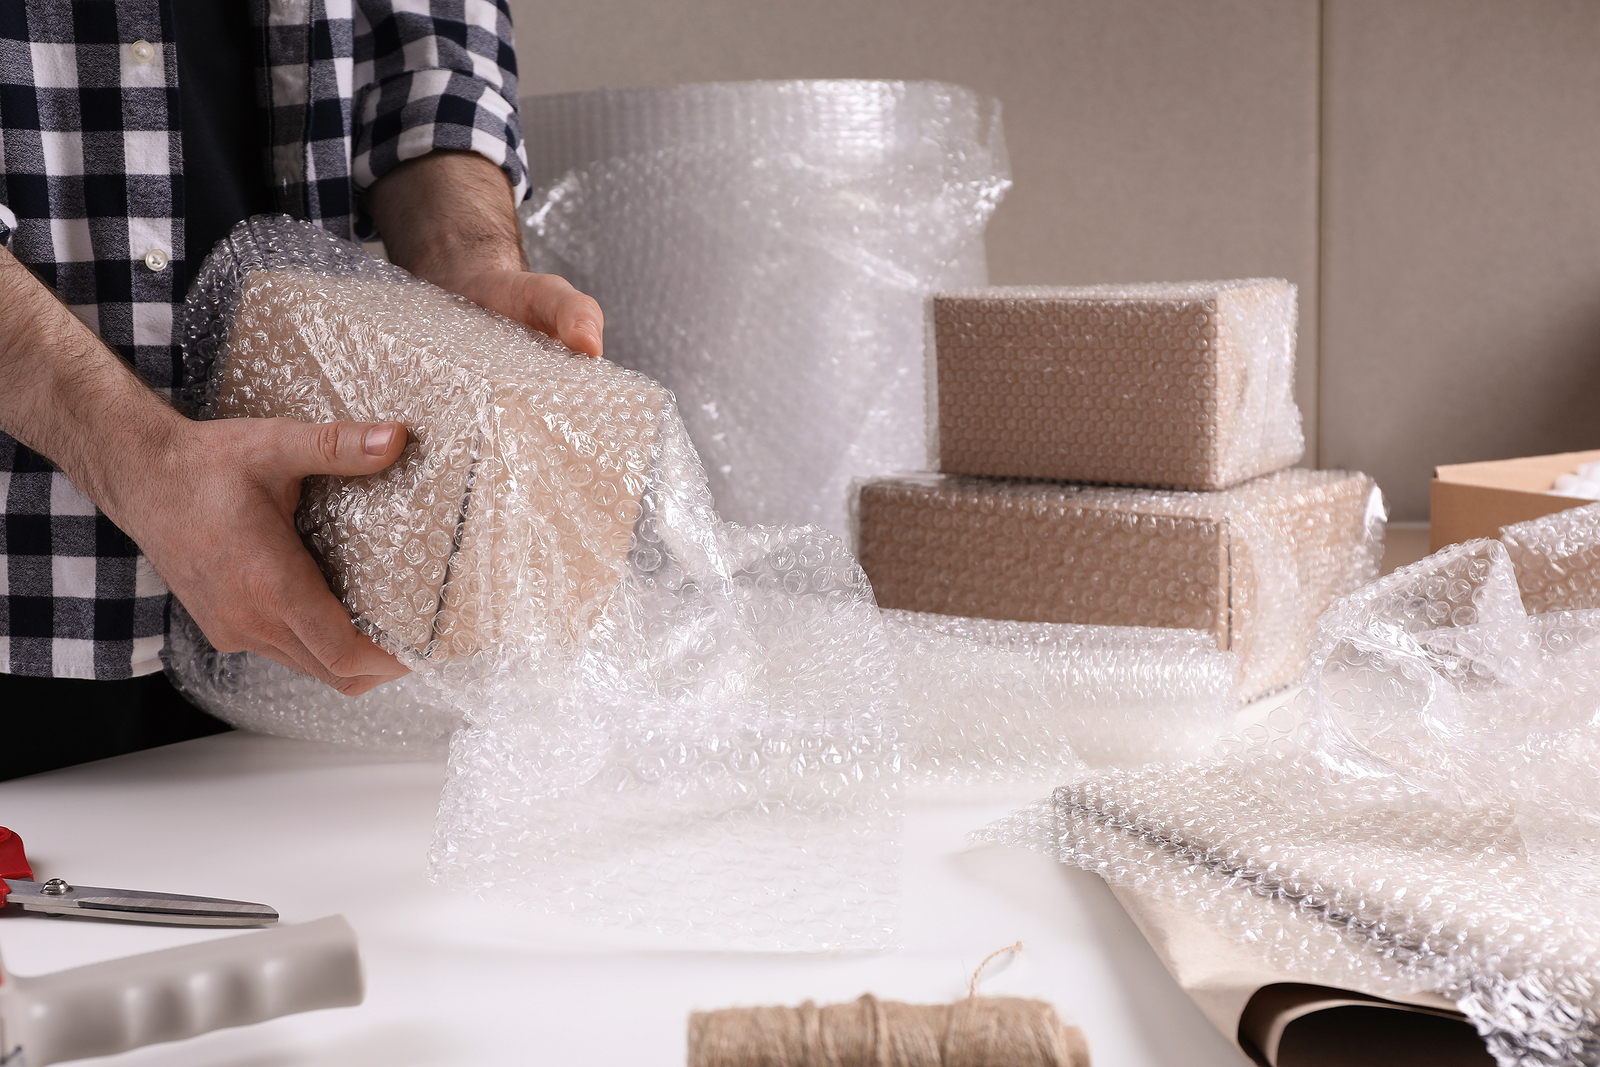 Where to Find the Best Art Packing Materials for Your Next Move